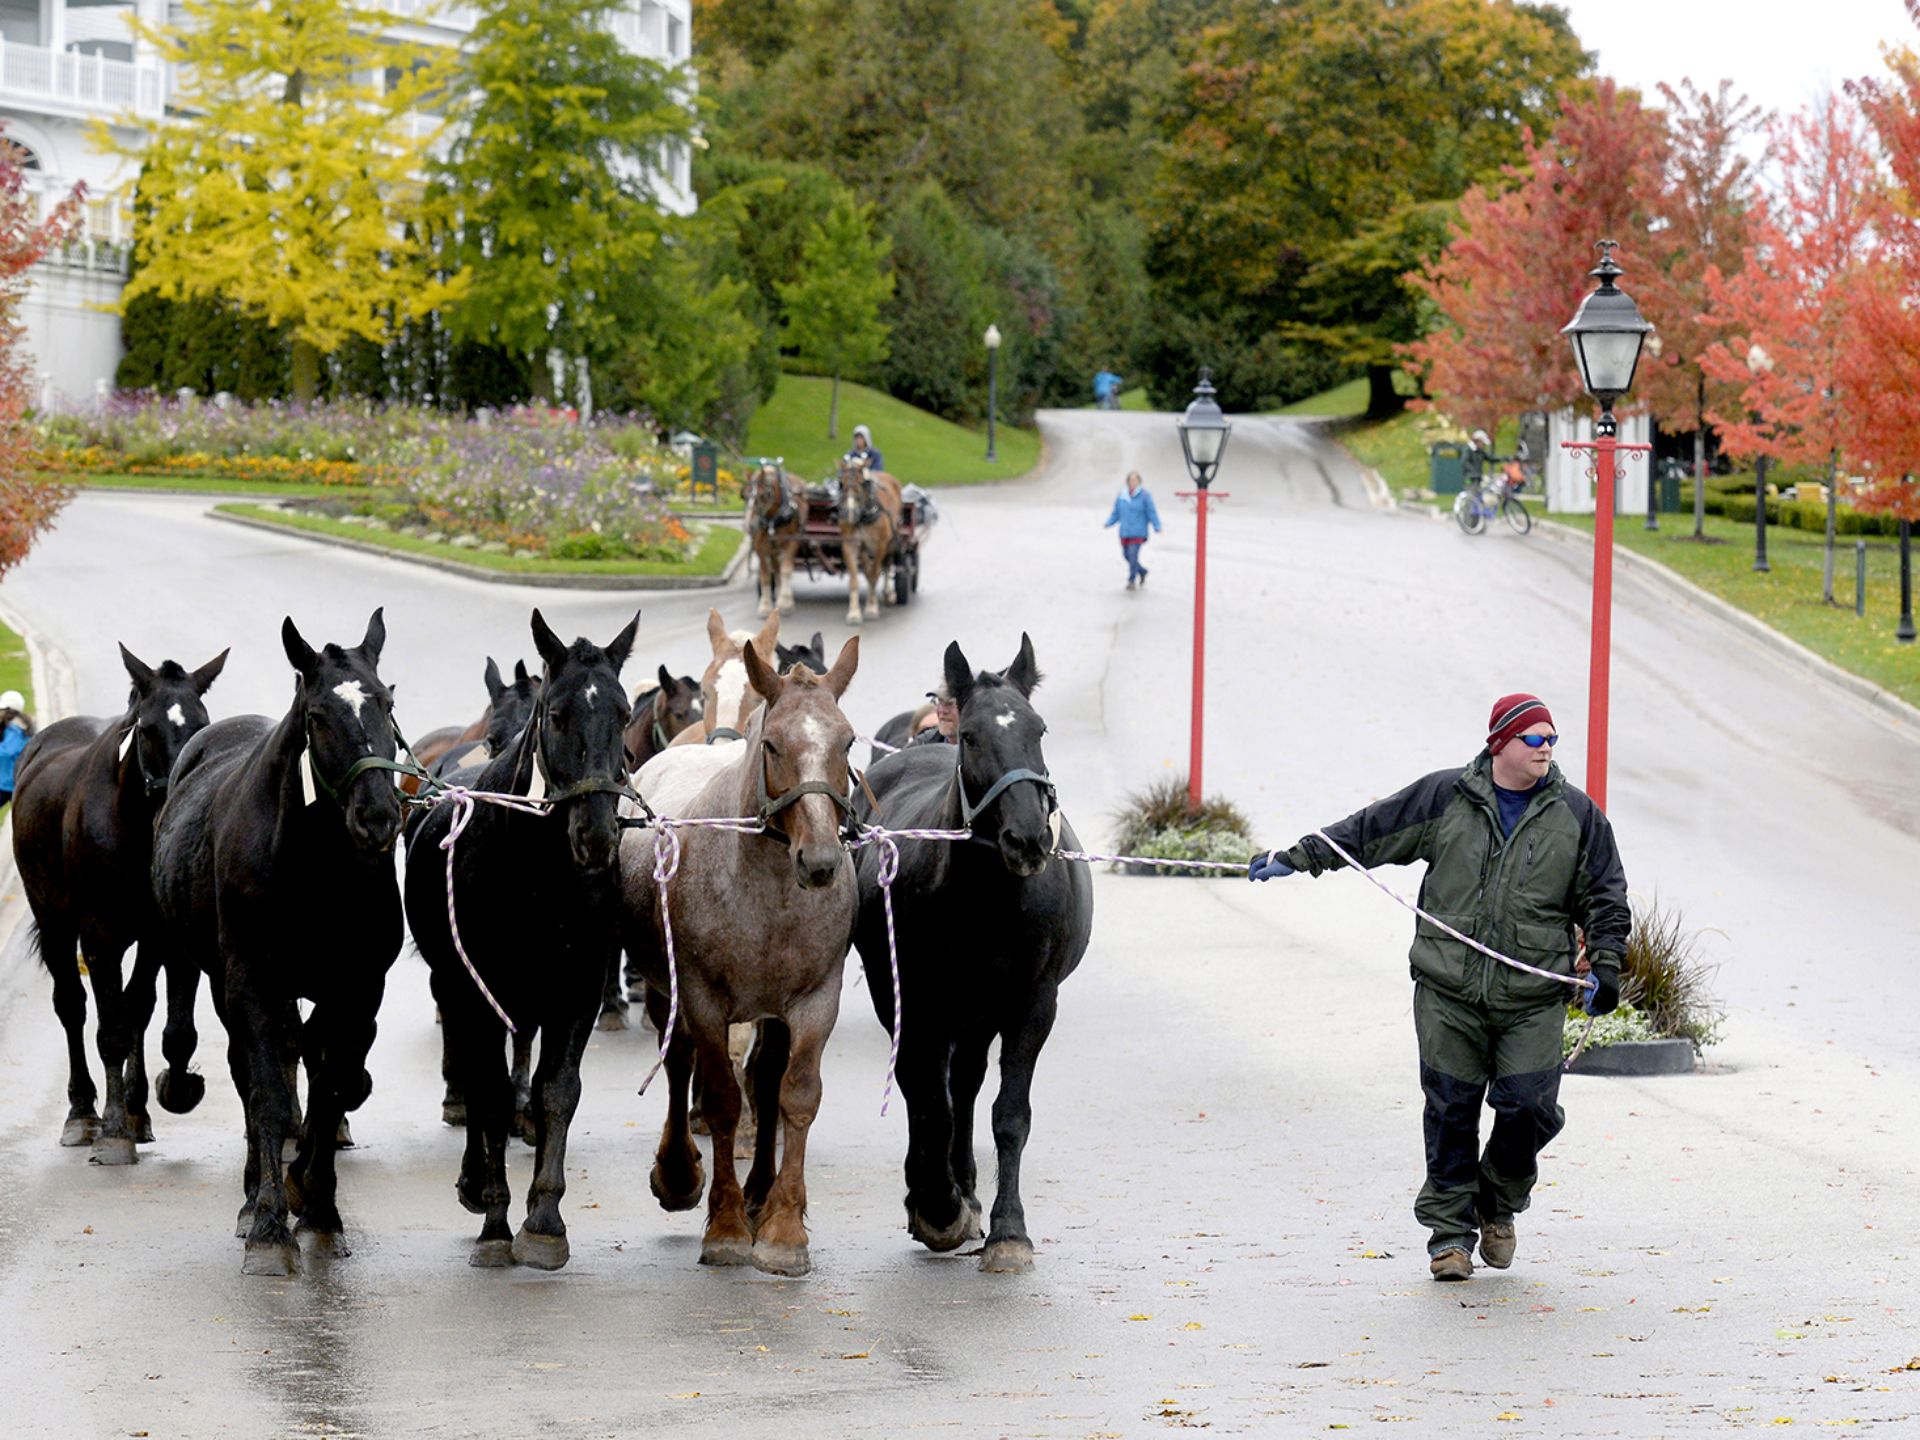 Out & About "Horses Of Mackinac" Focuses On A Reporter's Desire To